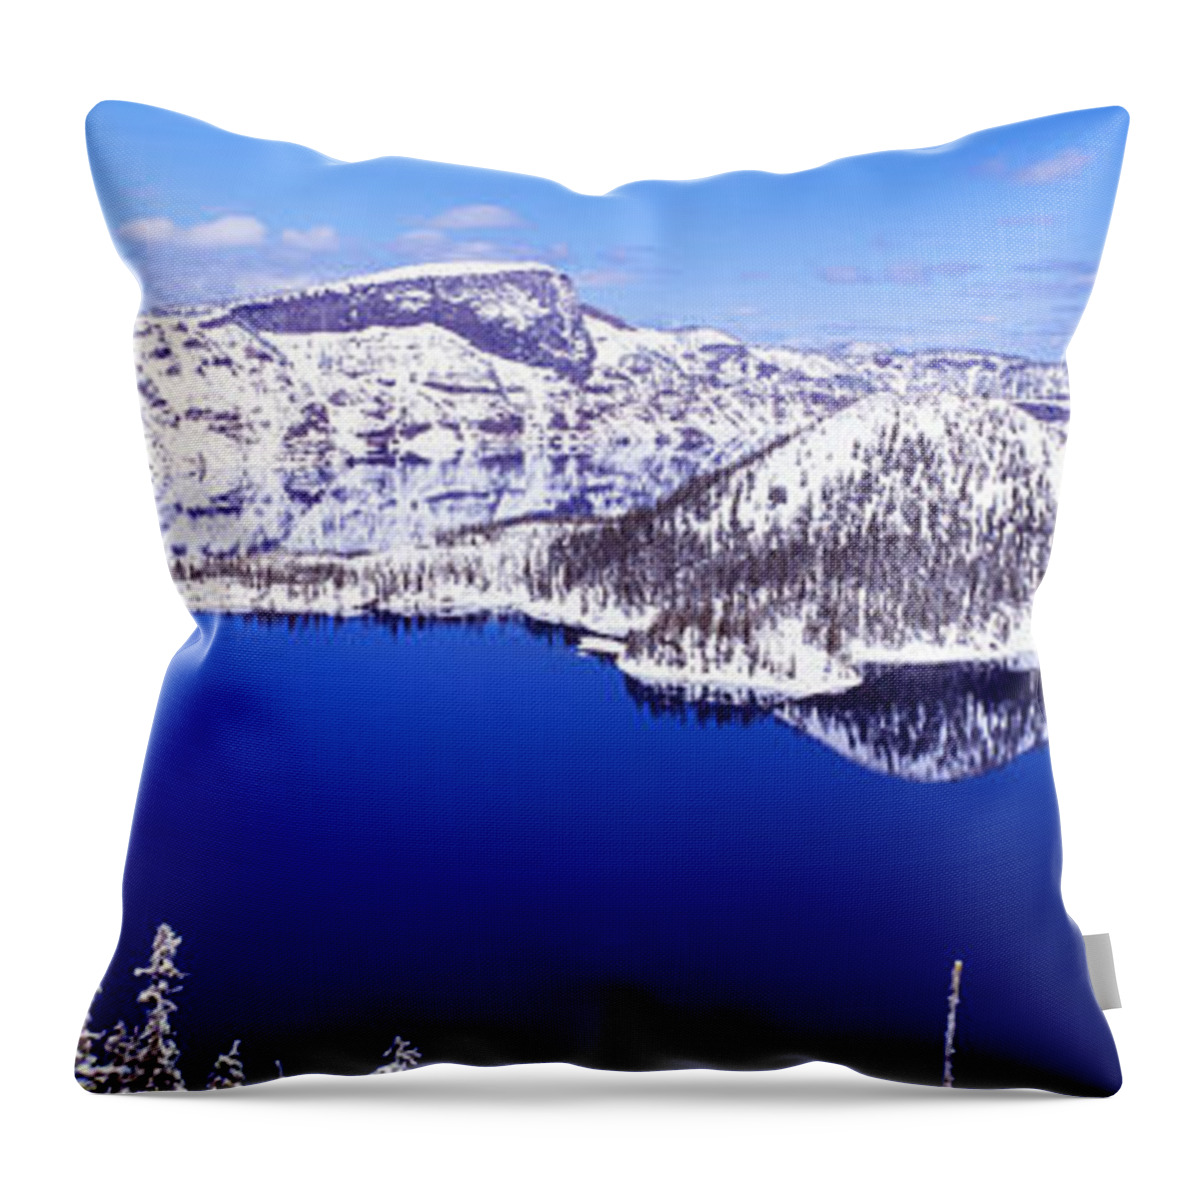 Photography Throw Pillow featuring the photograph Usa, Oregon, Crater Lake National Park by Panoramic Images